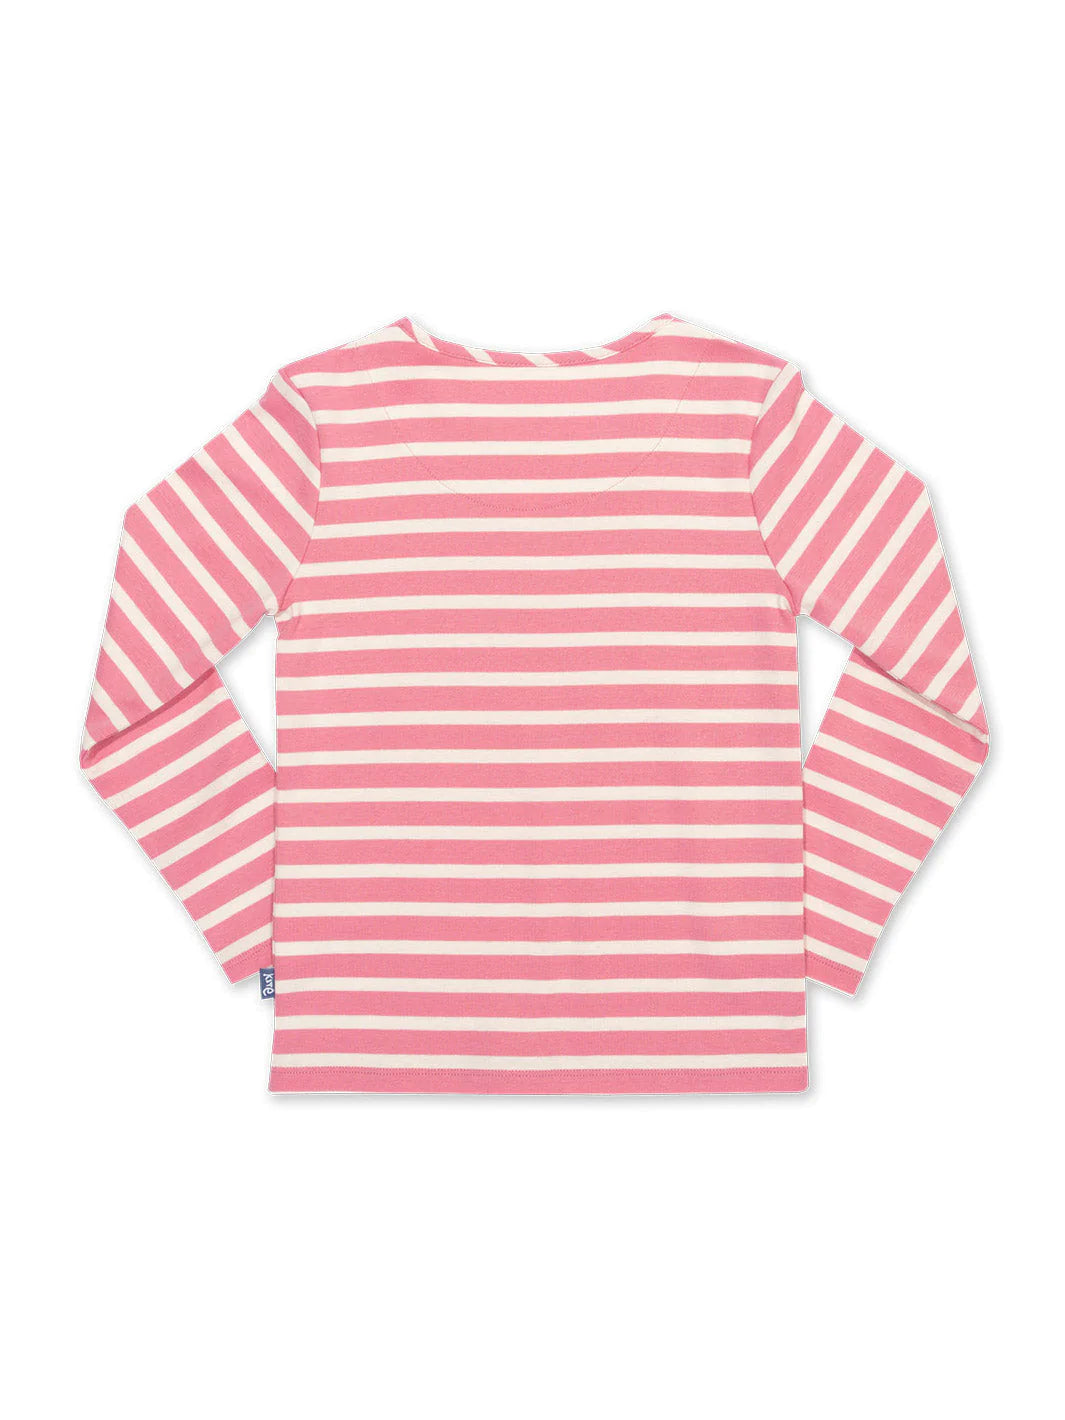 Kite Dusty Pink and Cream Breton Top